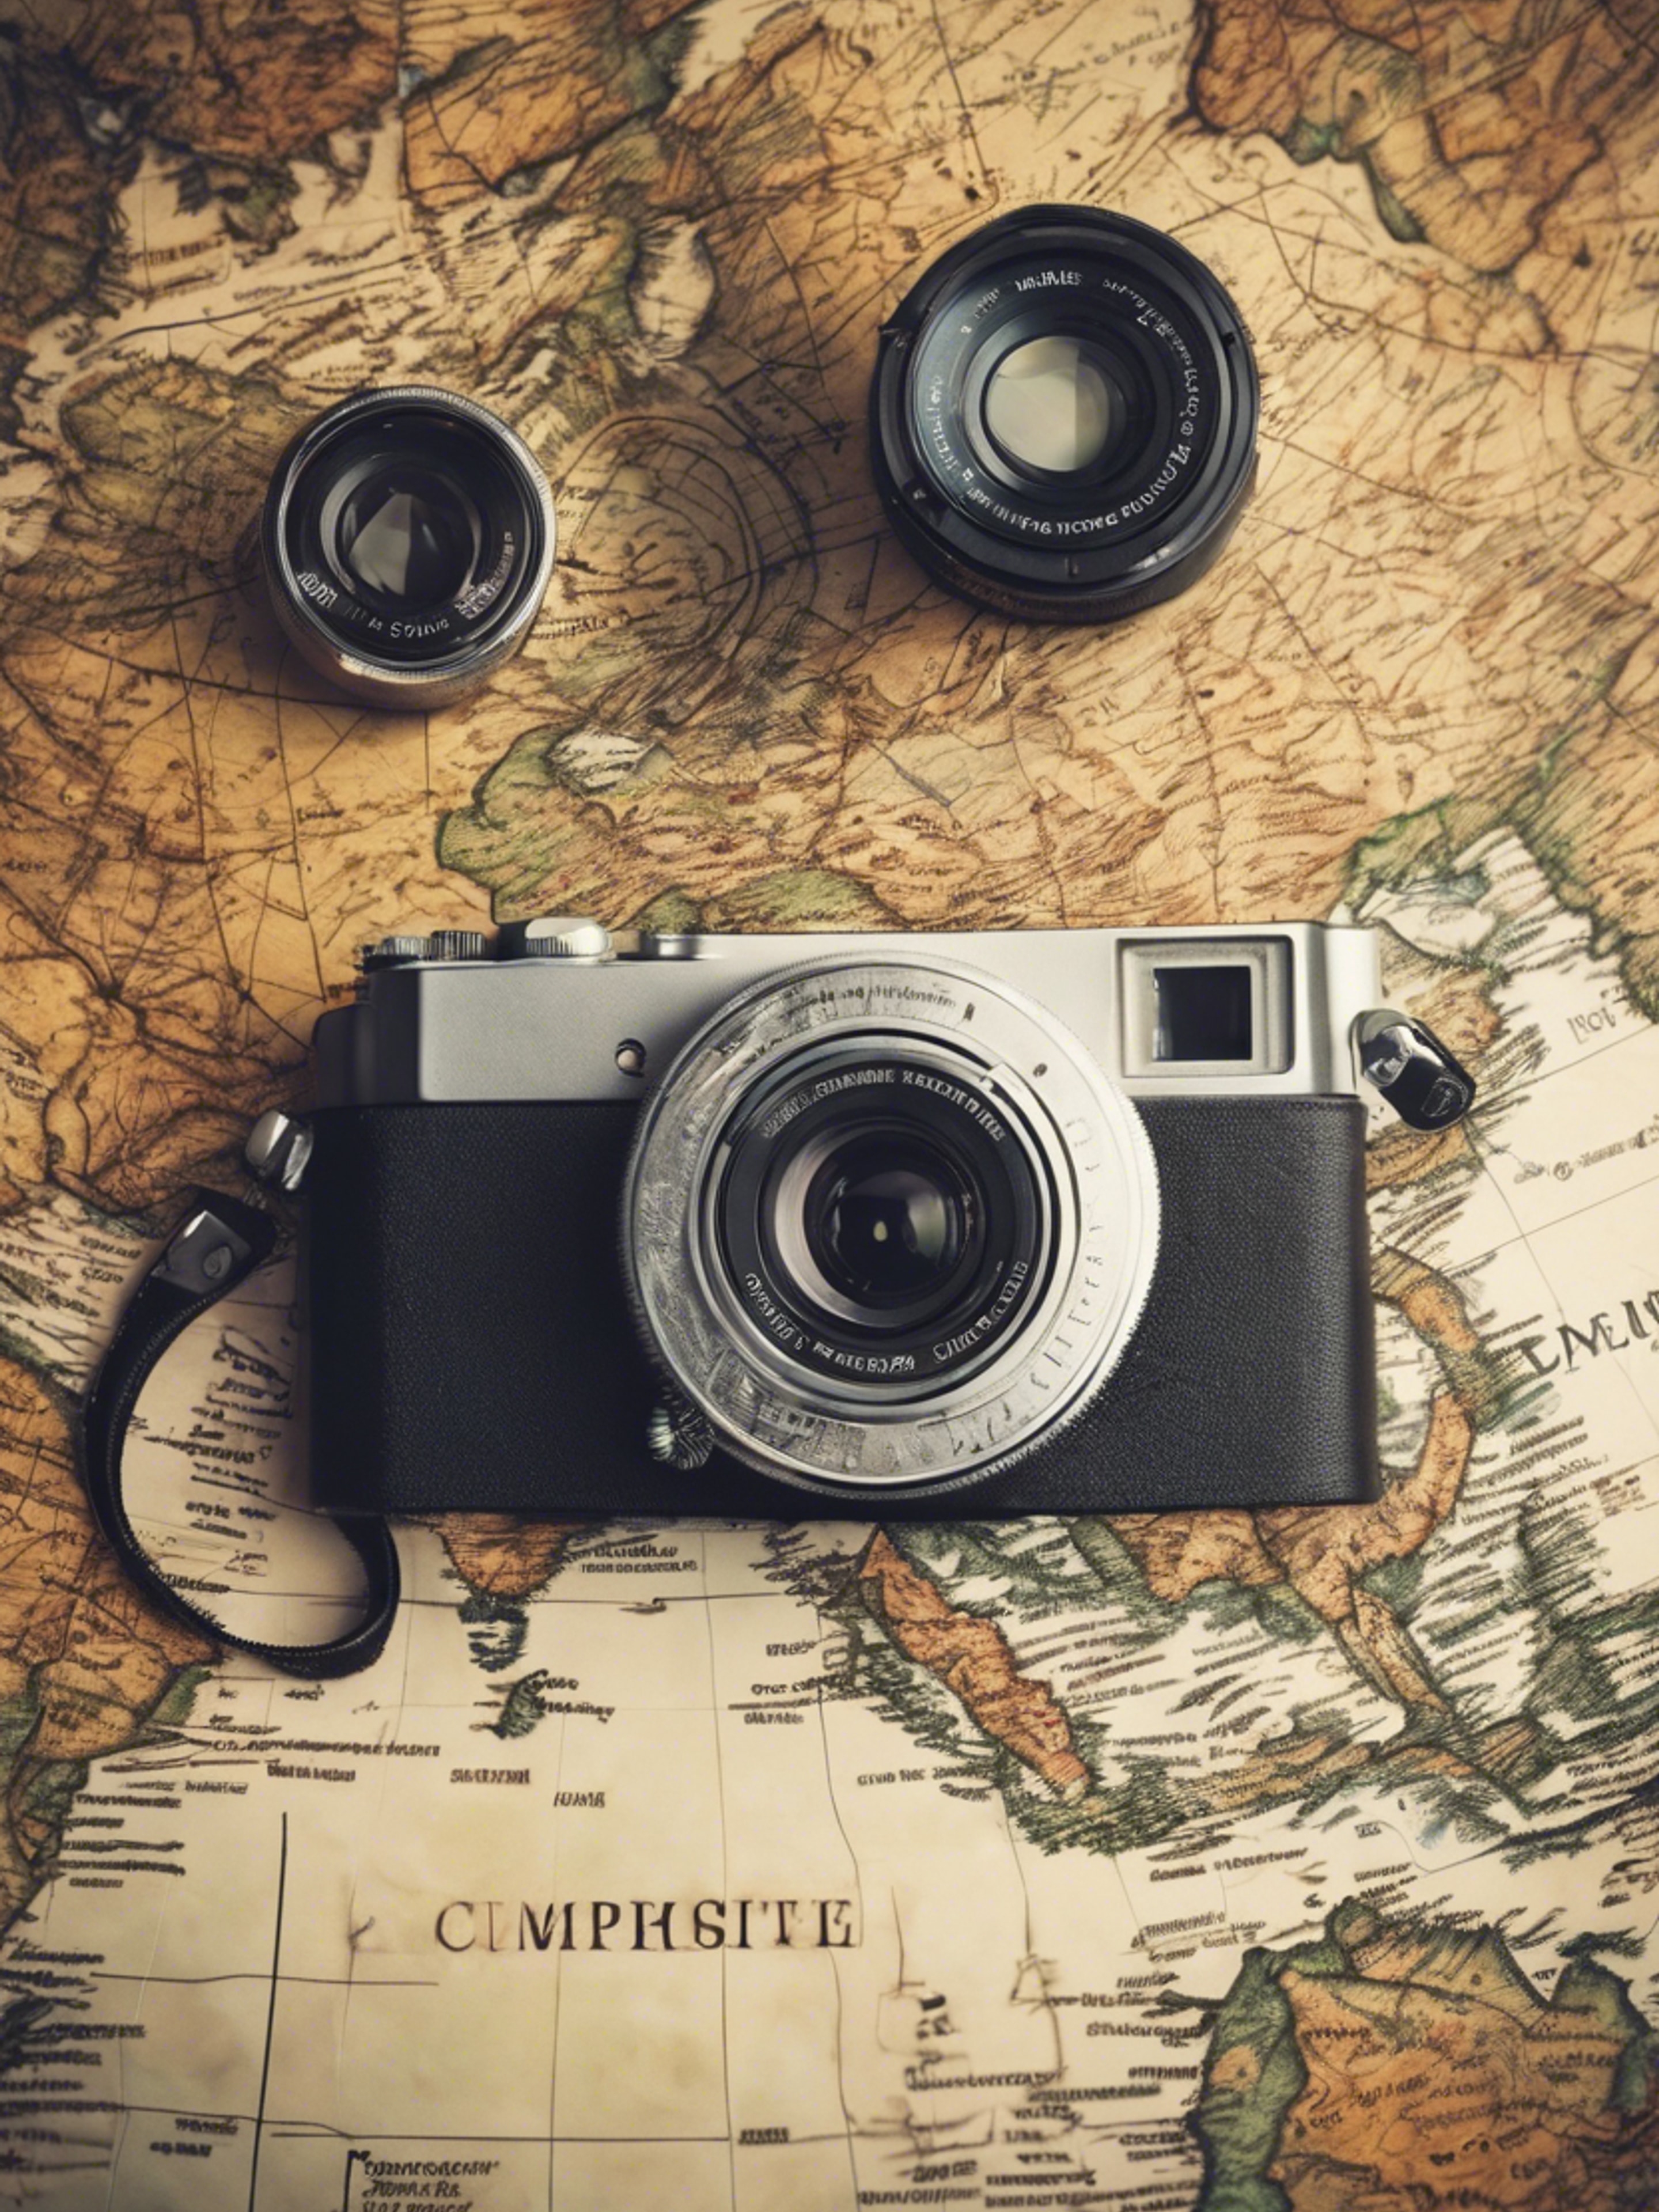 A compact camera with vintage design, placed on a world map to convey the spirit of travel. Taustakuva[89e32525bdc346769ef4]